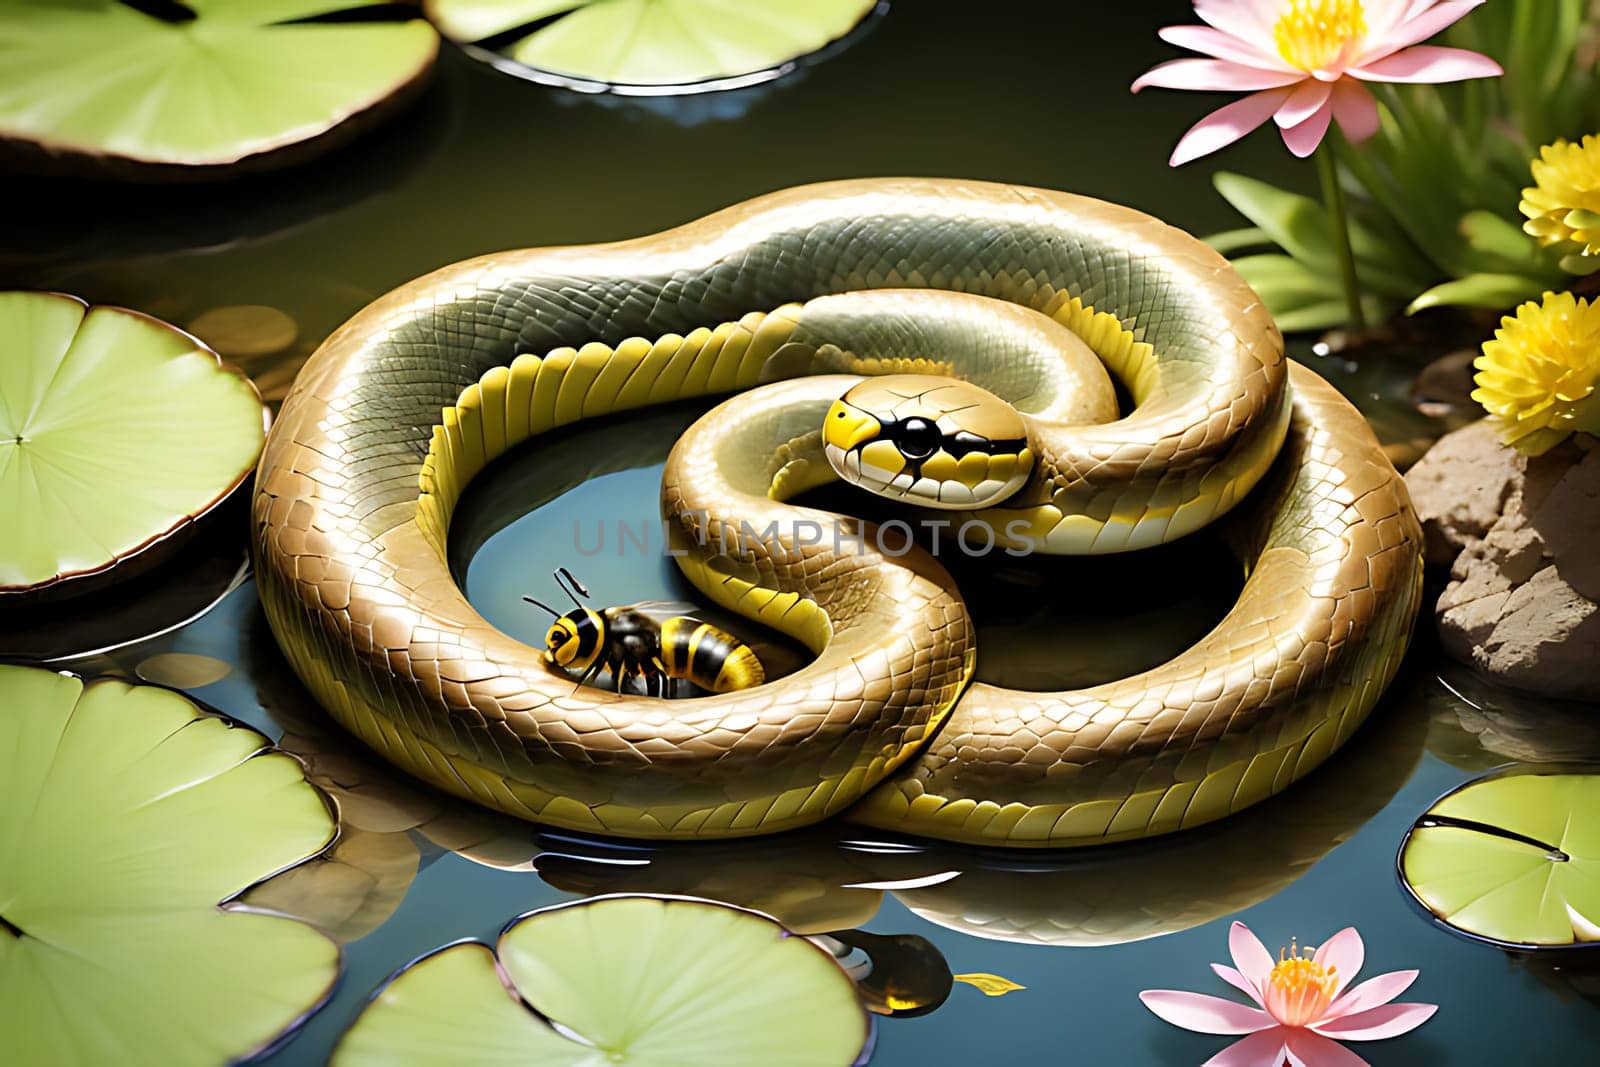 A snake and a bee are seen on a pond covered with lily pads. The snake appears to be slithering towards the bee, possibly attracted by its movement or scent.